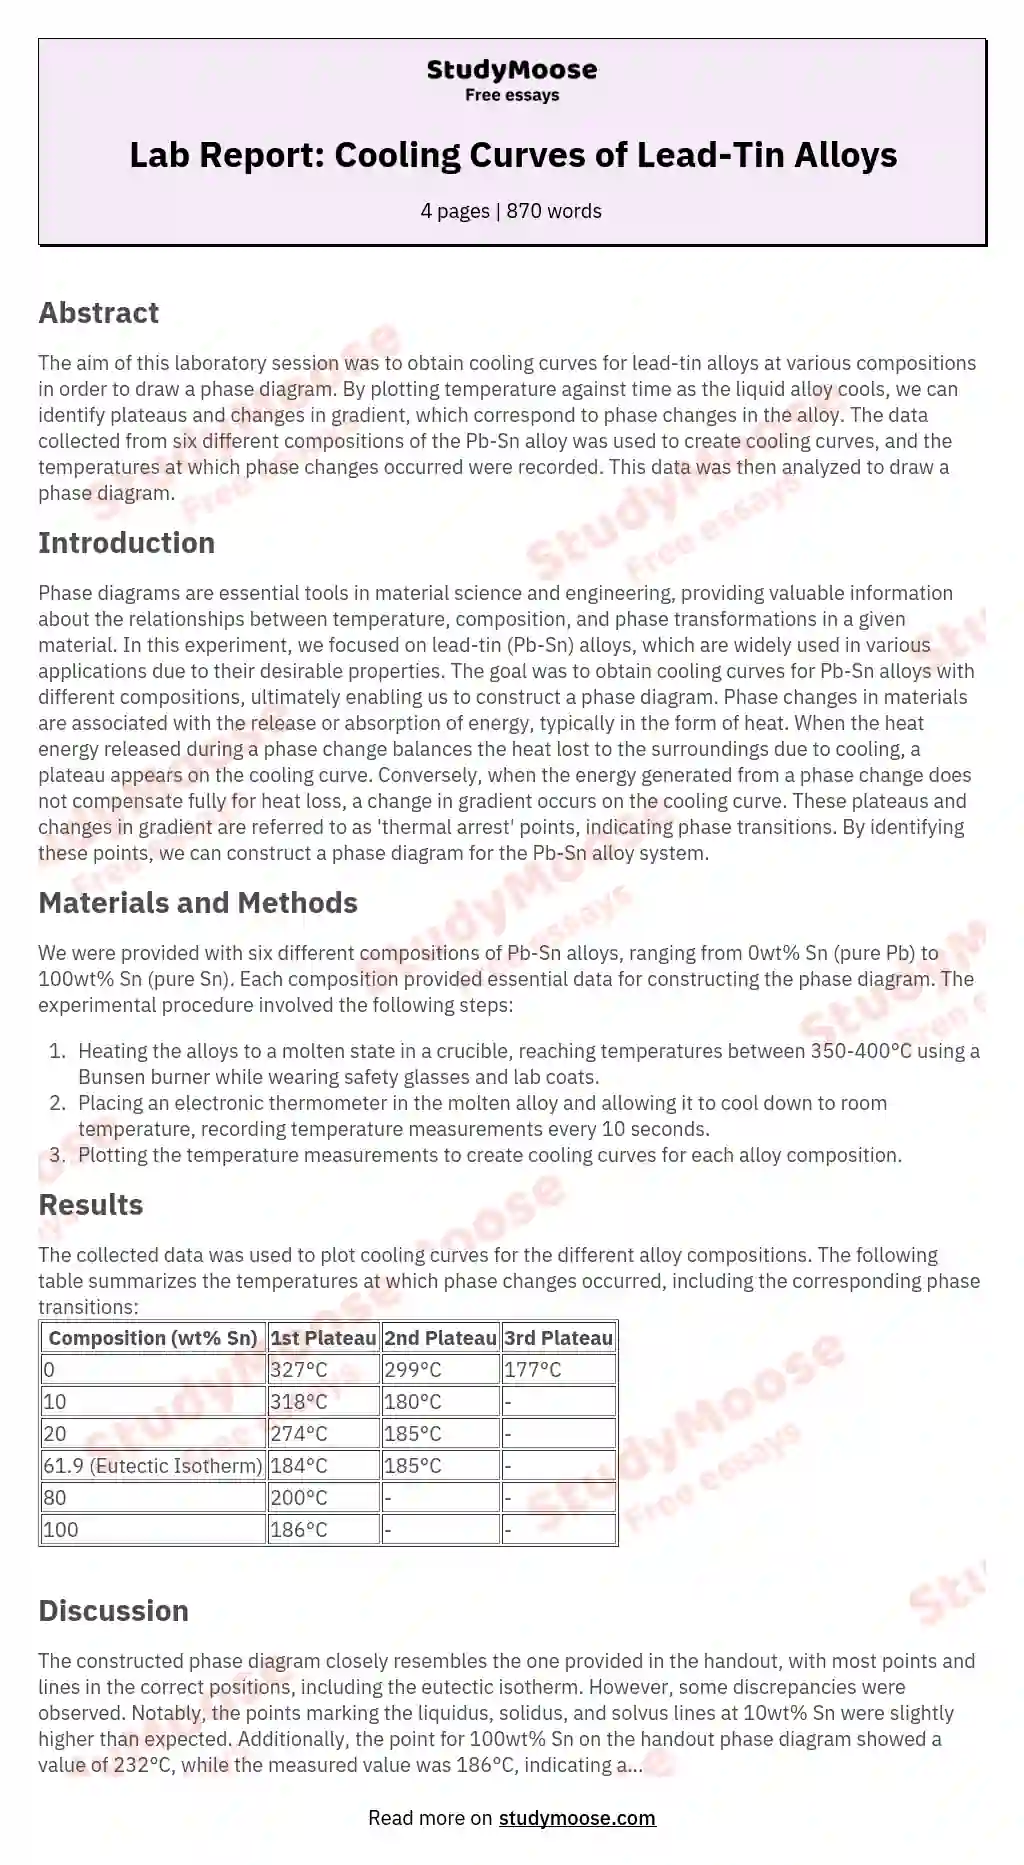 Lab Report: Cooling Curves of Lead-Tin Alloys essay